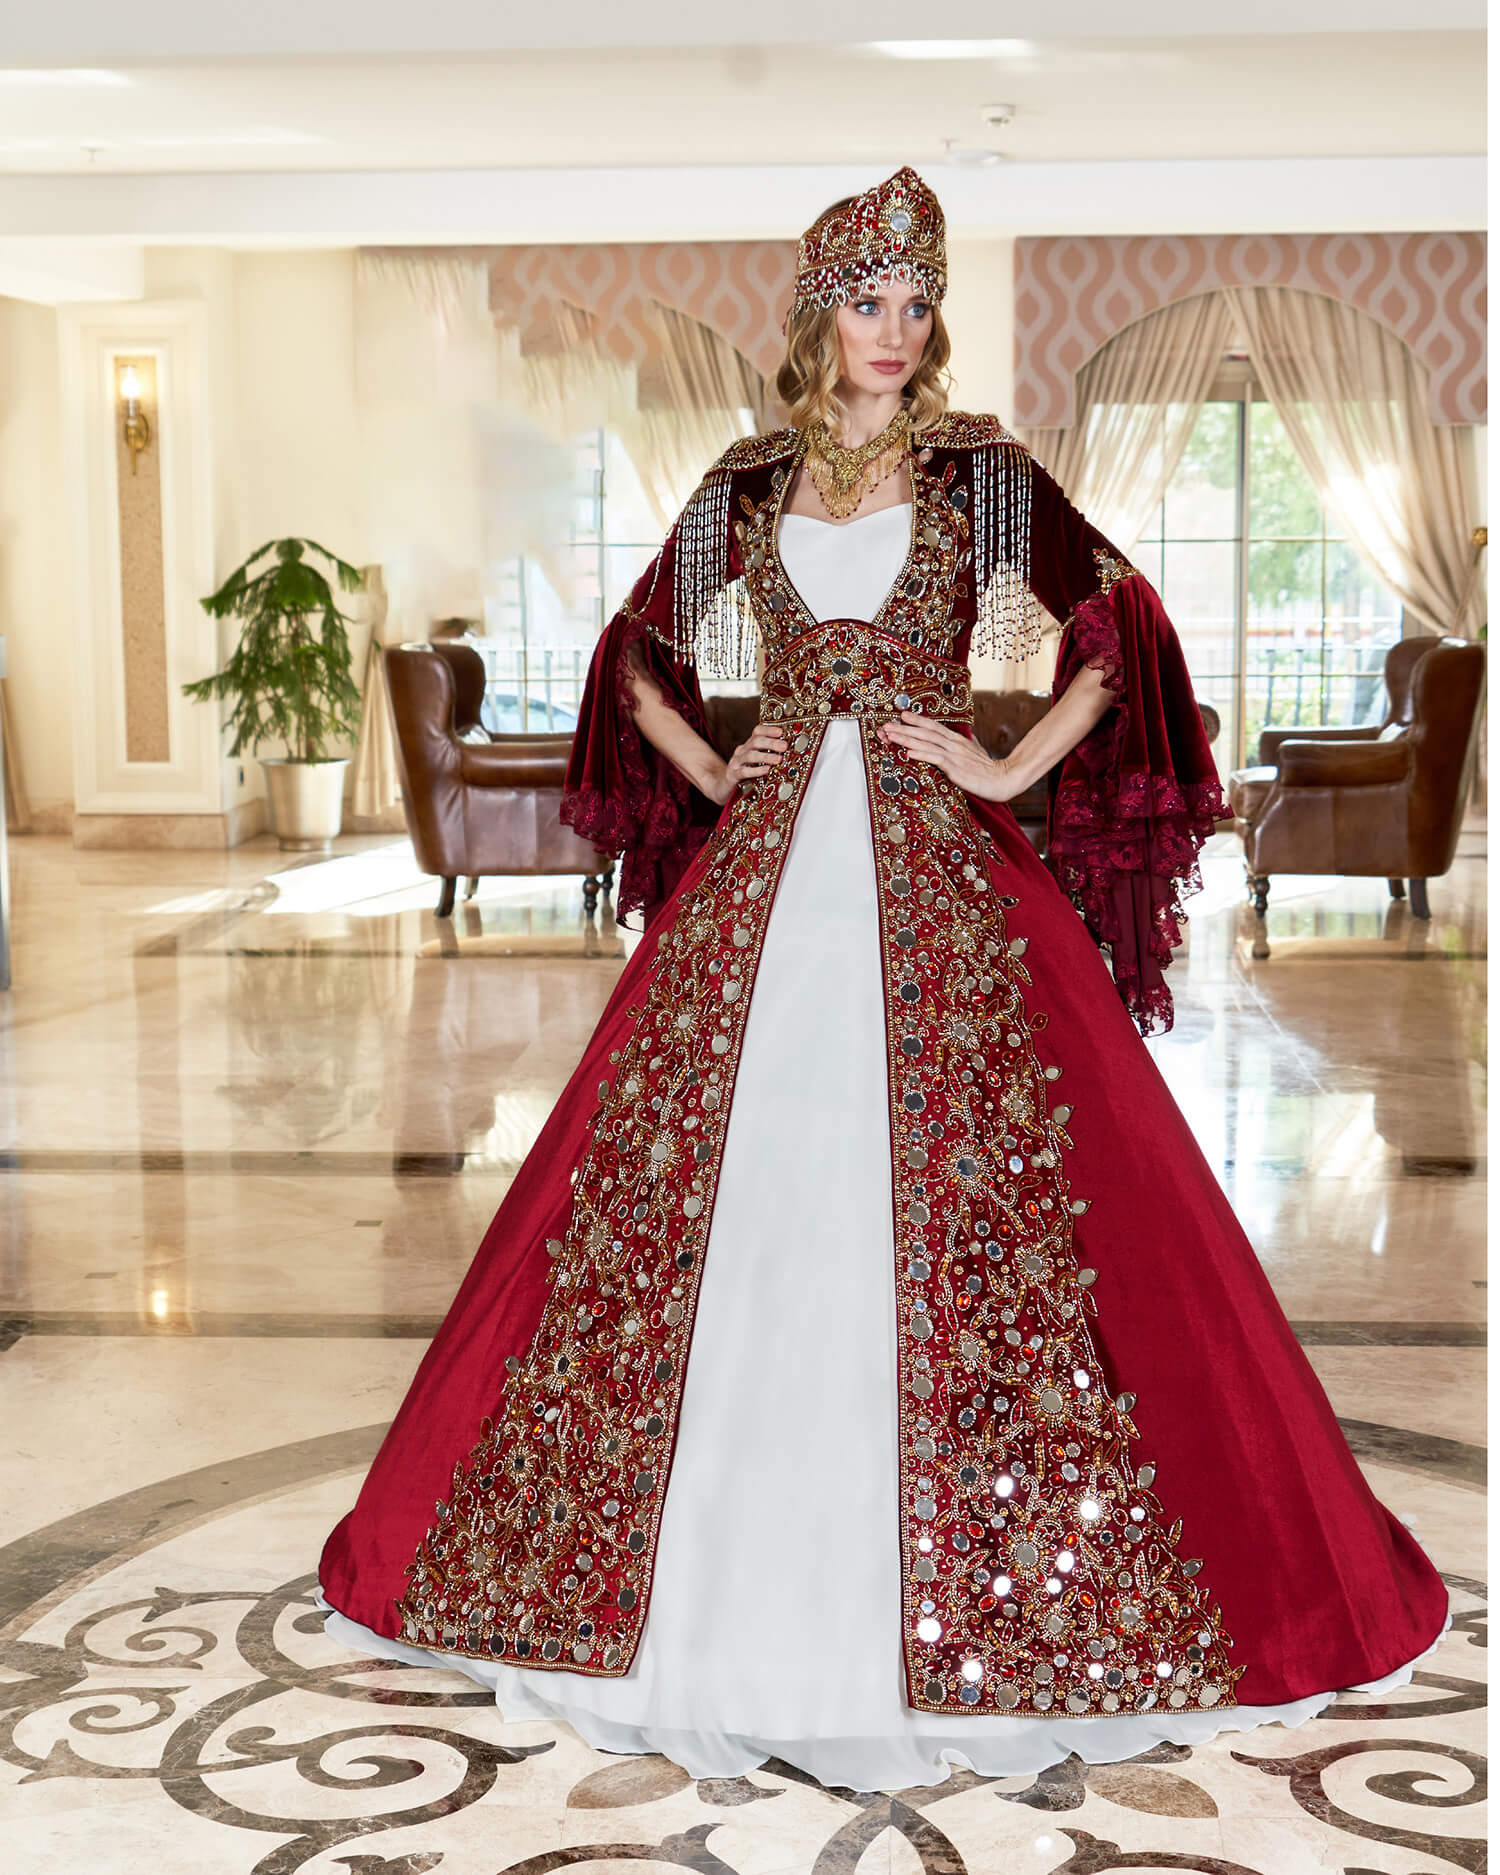 Stone Embroidered Long Fluffy Henna Dress